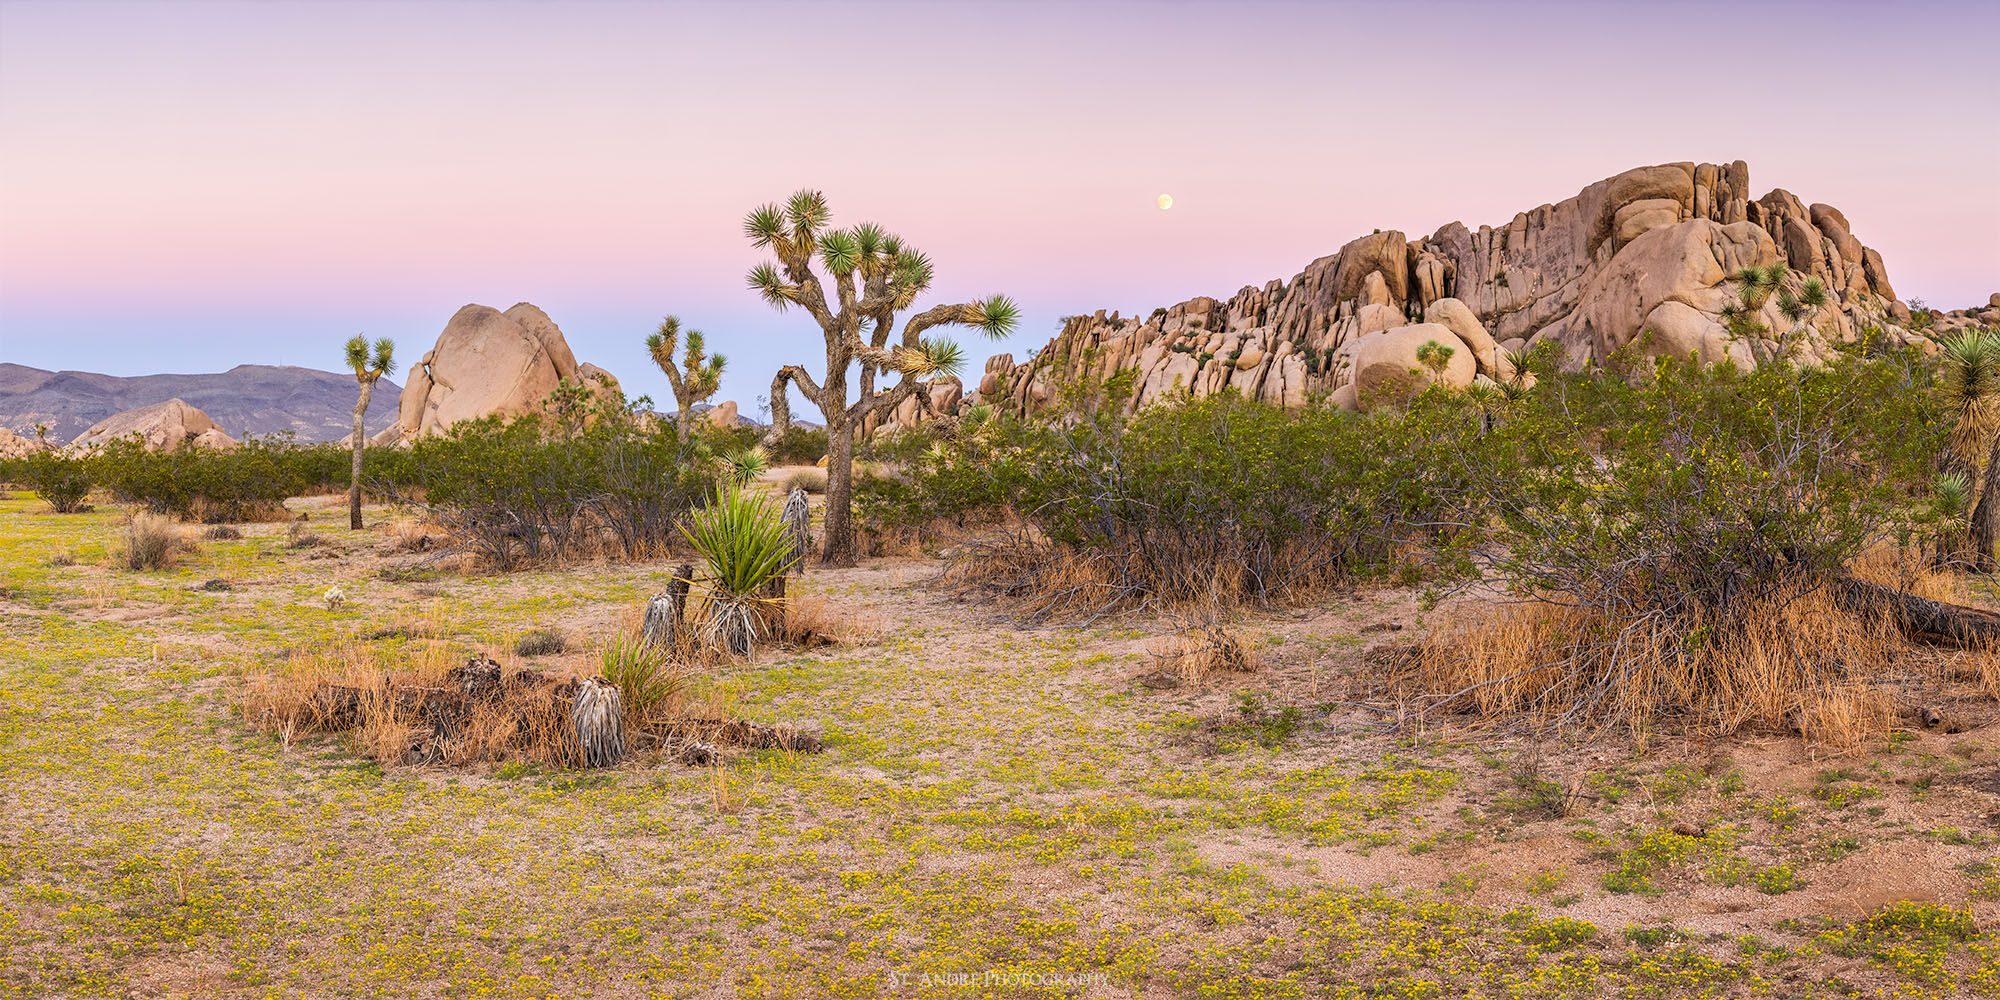 Joshua trees in a desert filled with desert plants and fields of small yellow flowers. Large stone structures in the background and a full moon rises above it. 